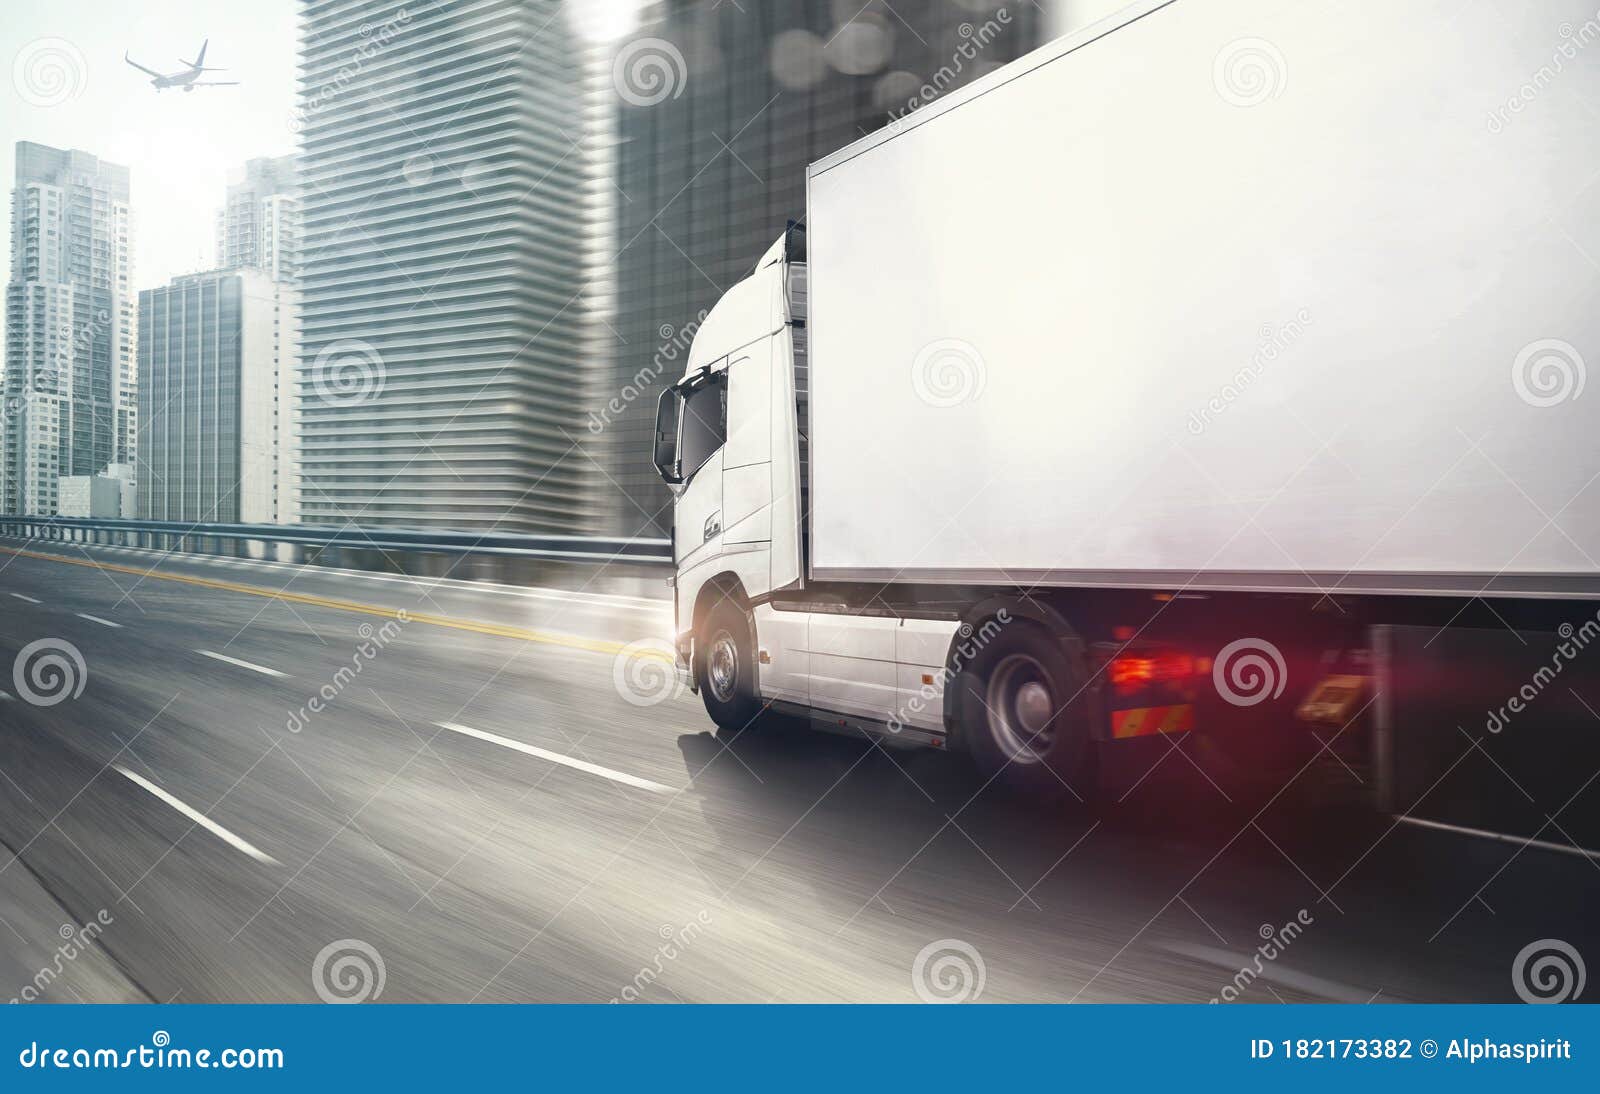 4 895 Moving Truck City Photos Free Royalty Free Stock Photos From Dreamstime